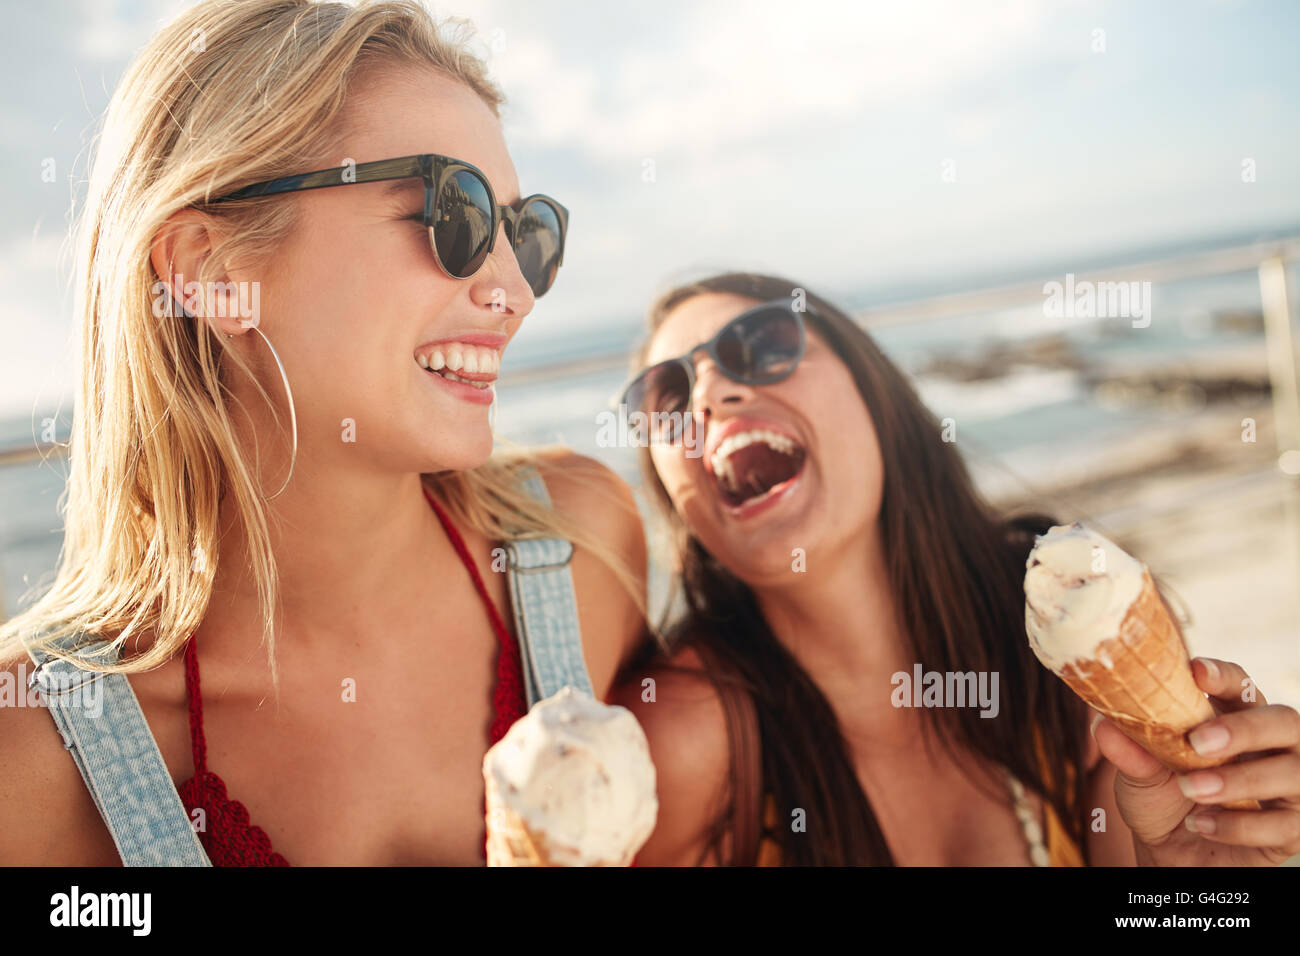 Two young women standing together laughing and eating ice cream. Happy young female friends with icecream enjoying together on a Stock Photo